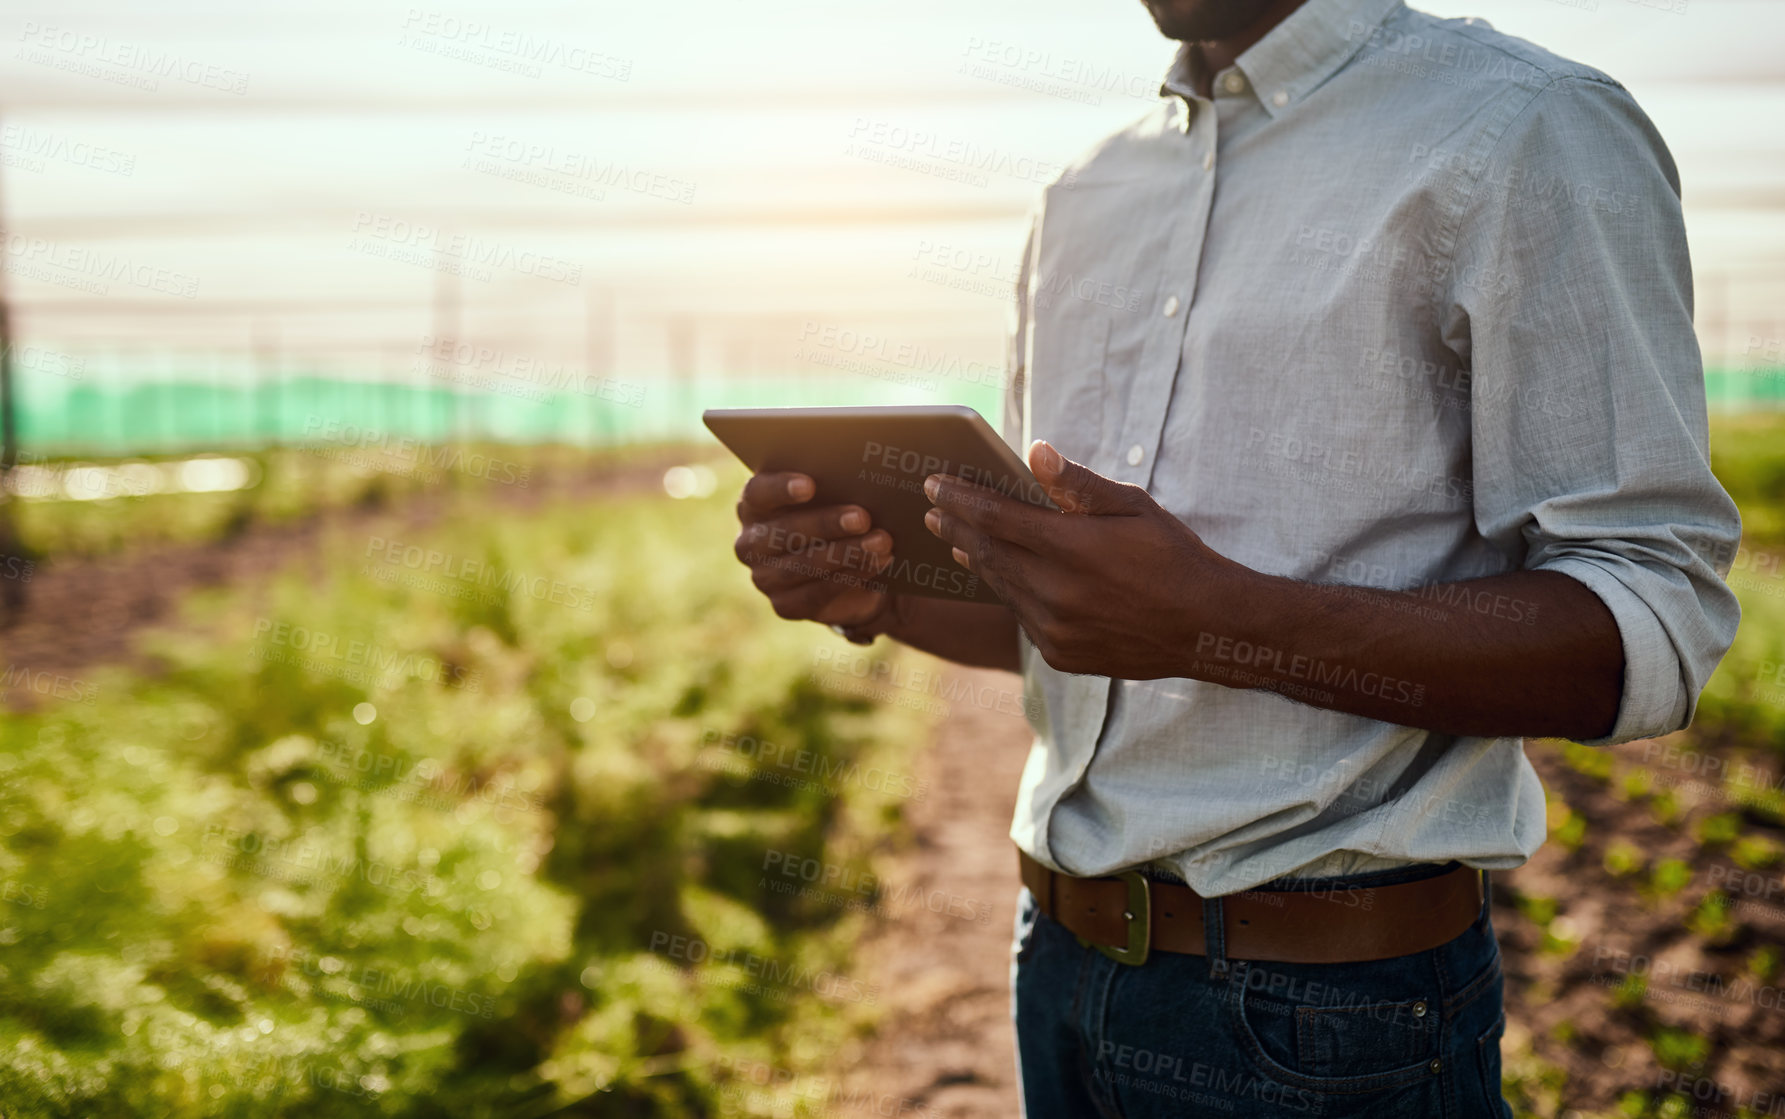 Buy stock photo Cropped shot of an unrecognizable male farmer using a tablet while working on his farm